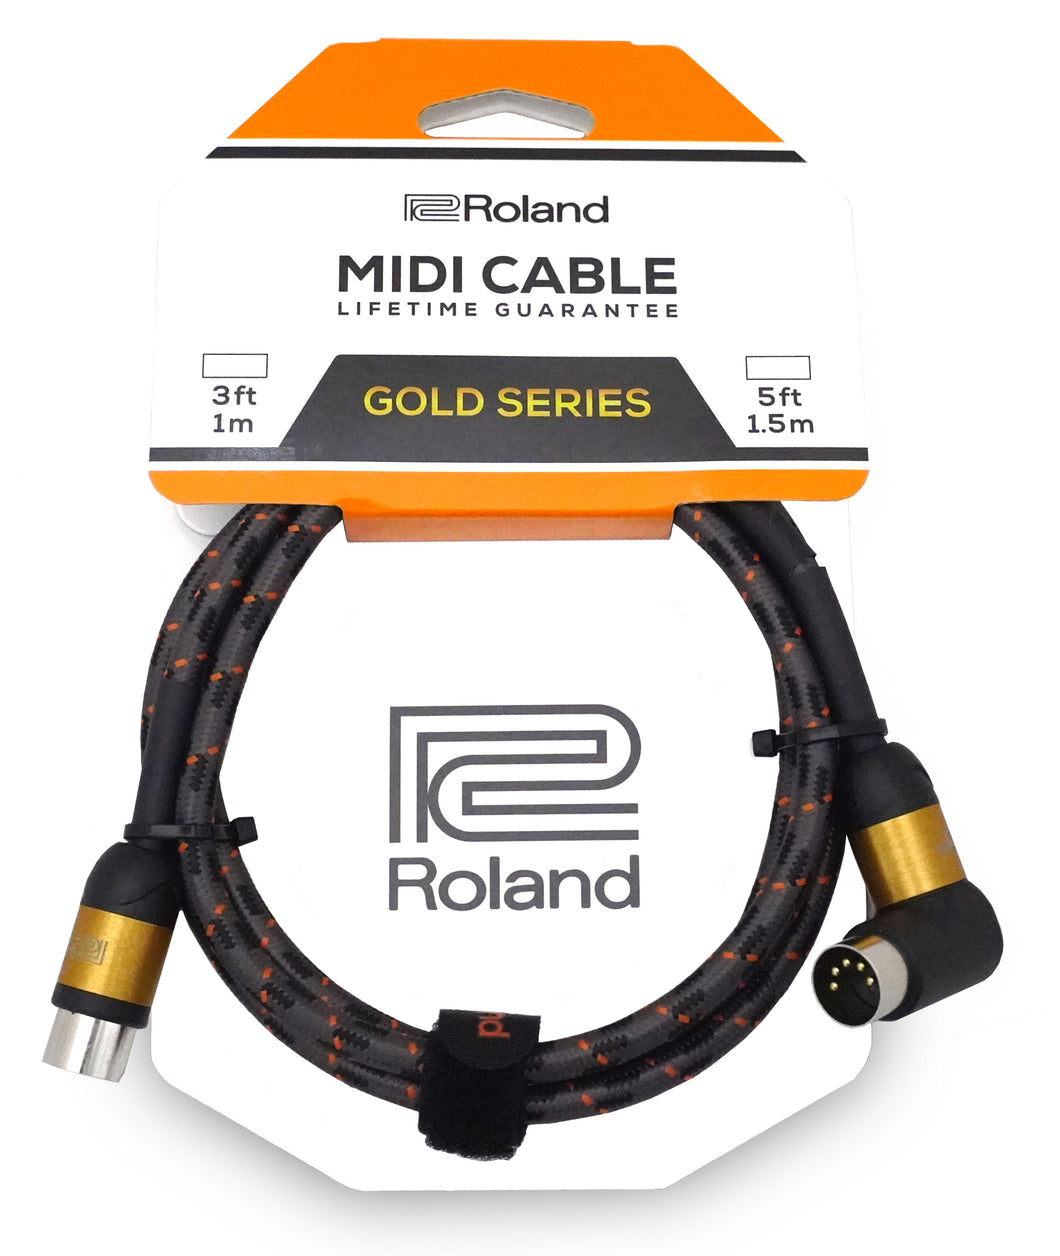 Roland Gold Series Midi Cable - 5ft Angled